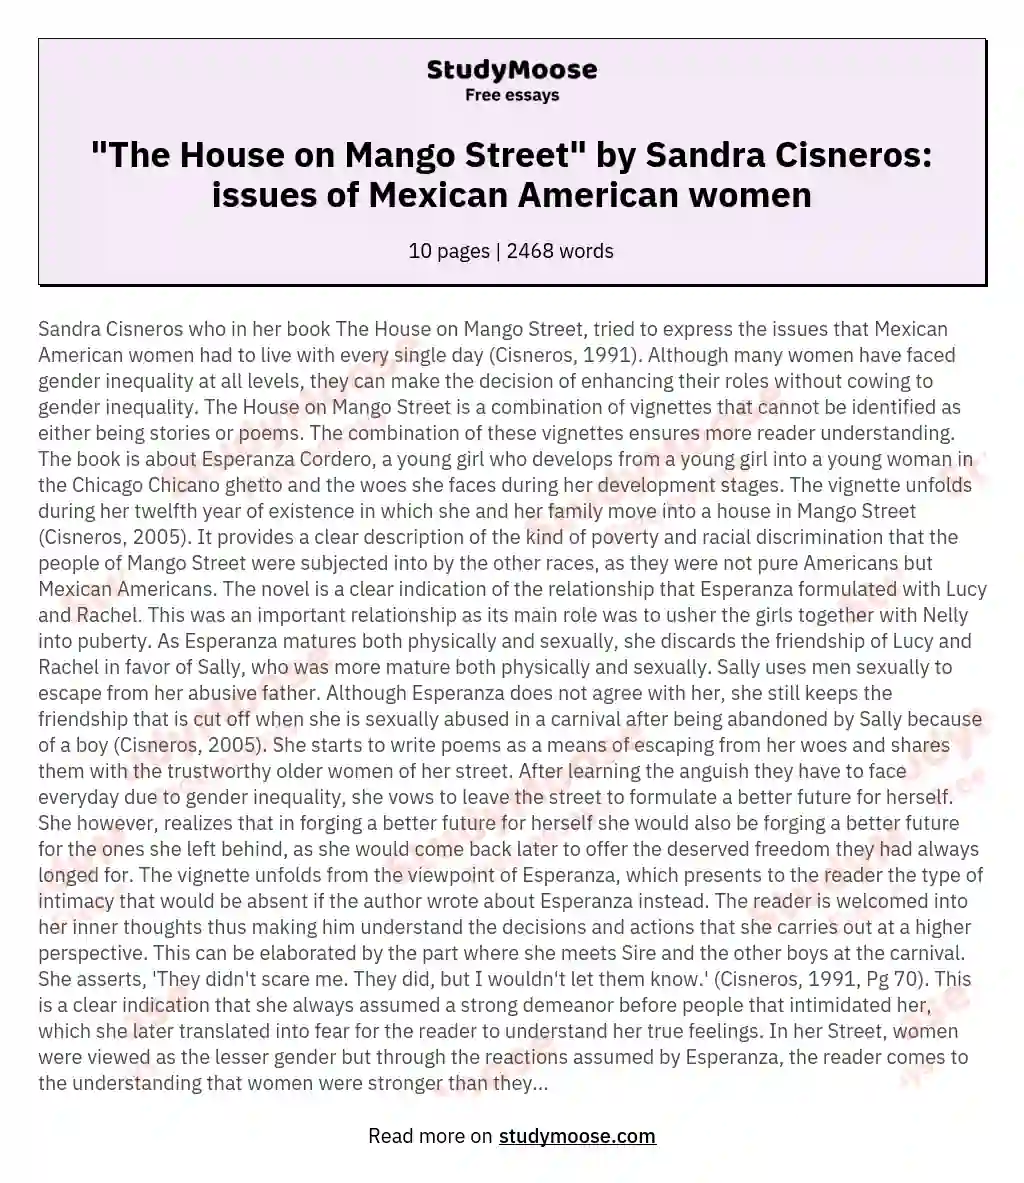 "The House on Mango Street" by Sandra Cisneros: issues of Mexican American women essay